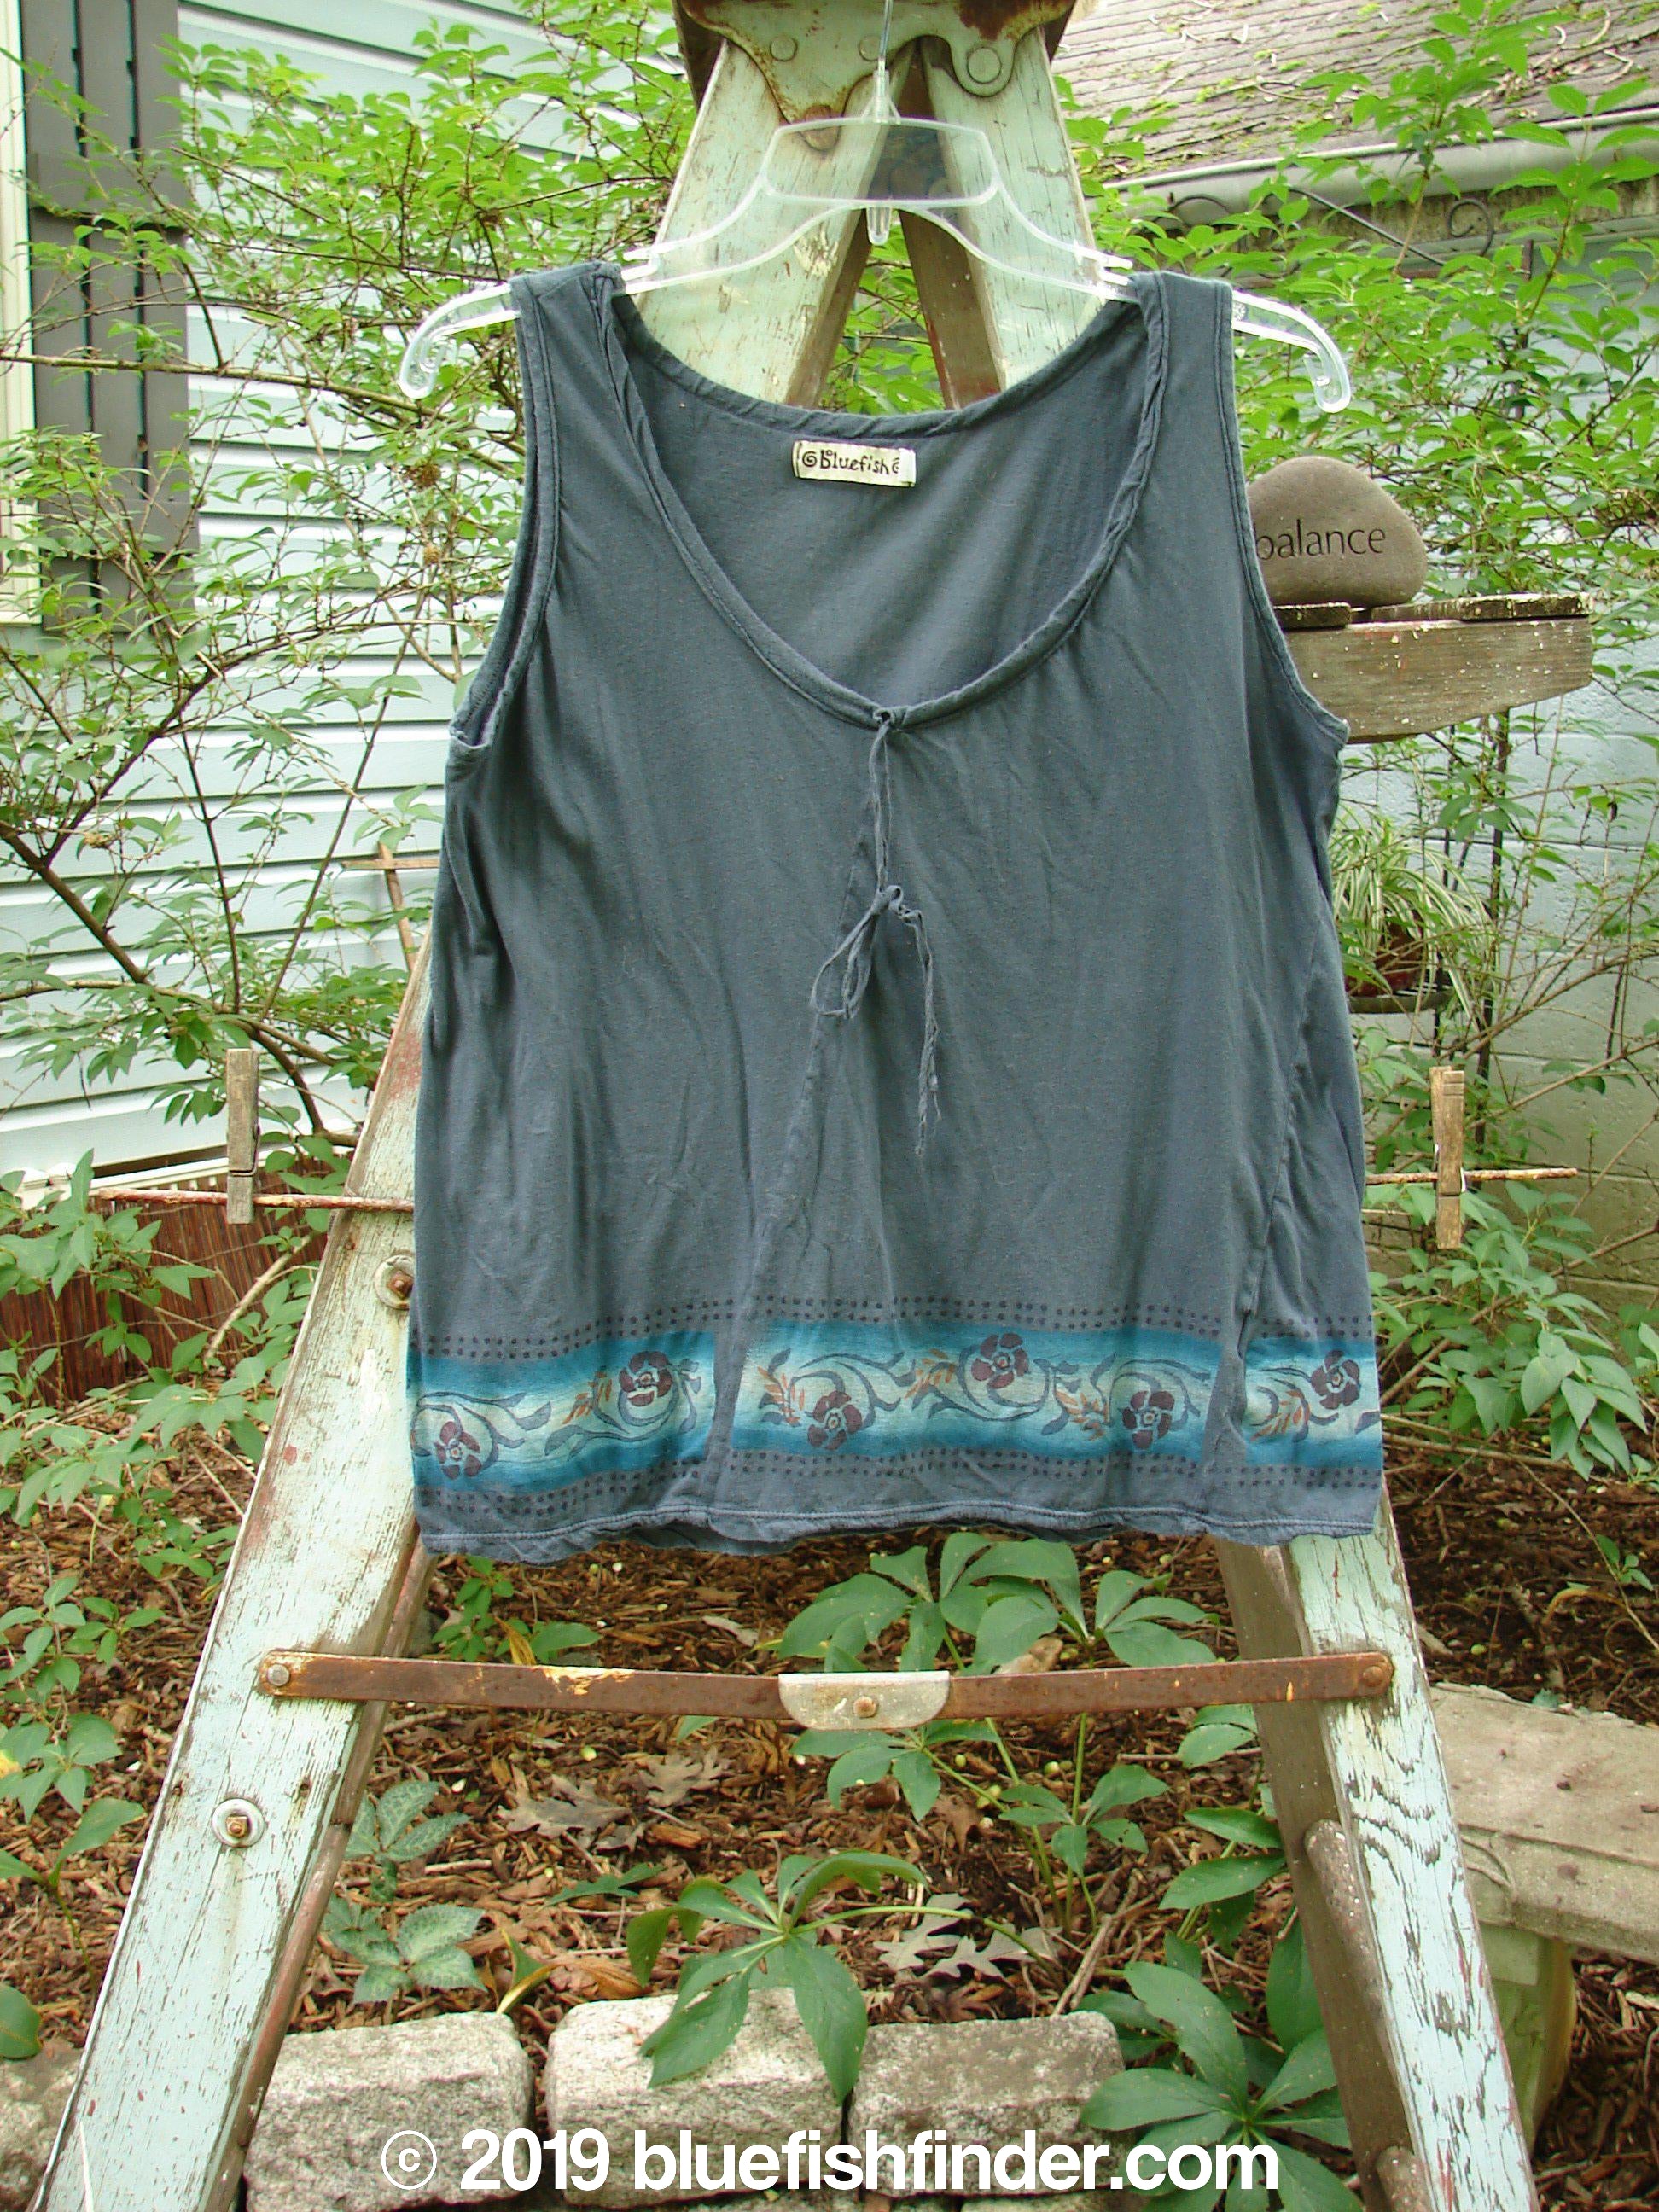 A grey tank top with a sweet front vertical neckline tie and gather, displayed on a wooden ladder.